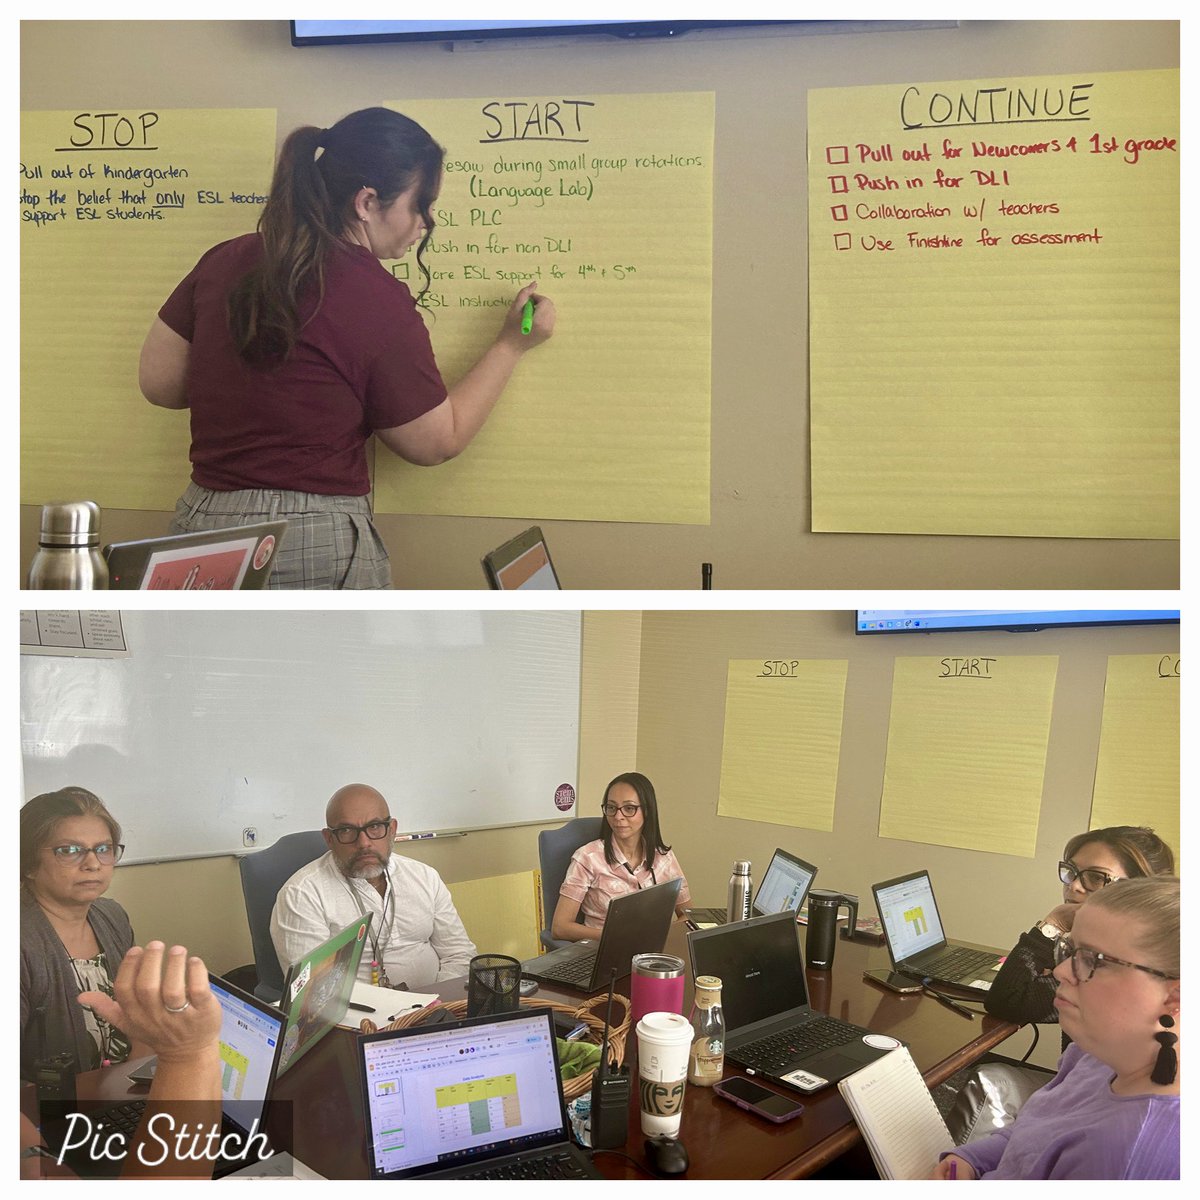 Action planning with our ESL team. Using Access test data to determine what we will stop, start and continue as we plan for next year. @AGHoulihan @blaise05 @SusanRodgersS4 @TopperJenn58692 @drjayjones @boatcandice @kevinplue @Renee_McKinnon1 @AlfredLeon04 @elenia_daniels @UCPSNC